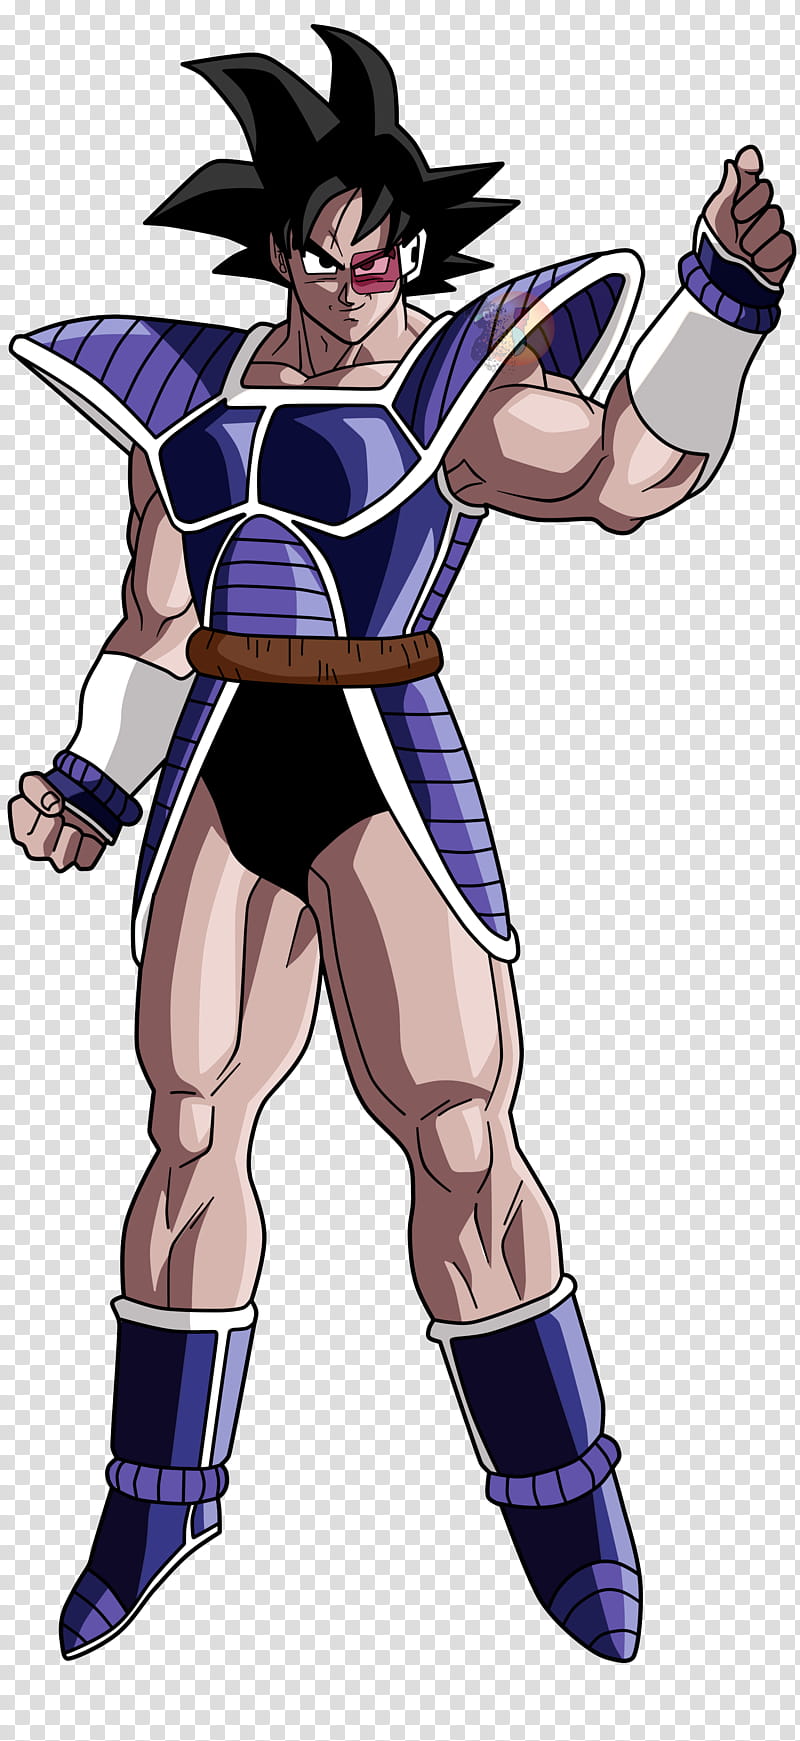 Turles Tarles FacuDibuja, Dragon Ball Z Turtles character transparent background PNG clipart